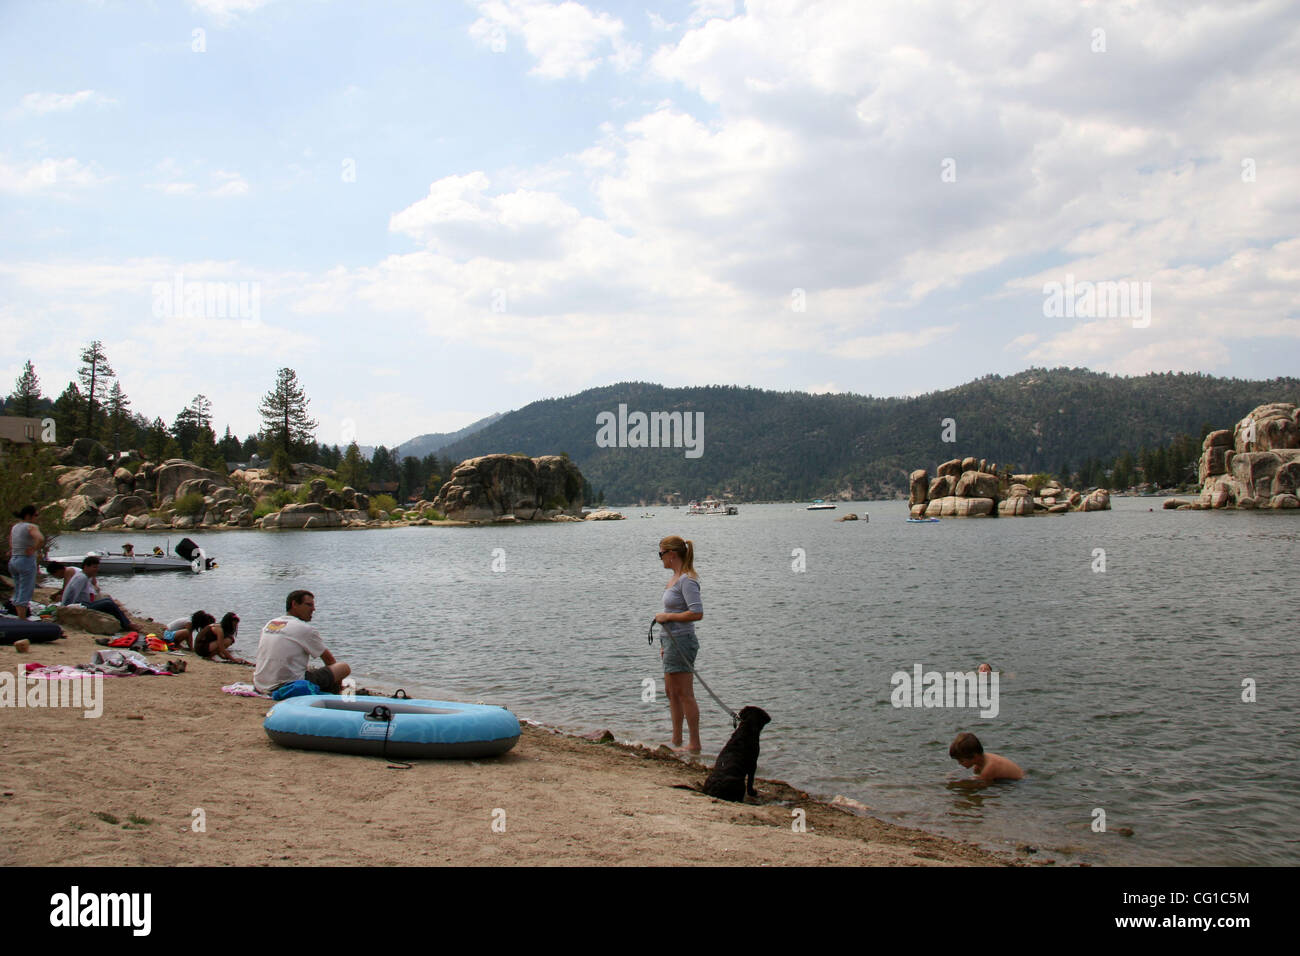 Aug 05, 2007 - Big Bear, CA, USA - Big Bear Lake is located in San Bernardino county and it provides an attractive setting for many outdoor activities, including fishing, boating and water skiing.  (Credit Image: © Camilla Zenz/ZUMA Press) Stock Photo